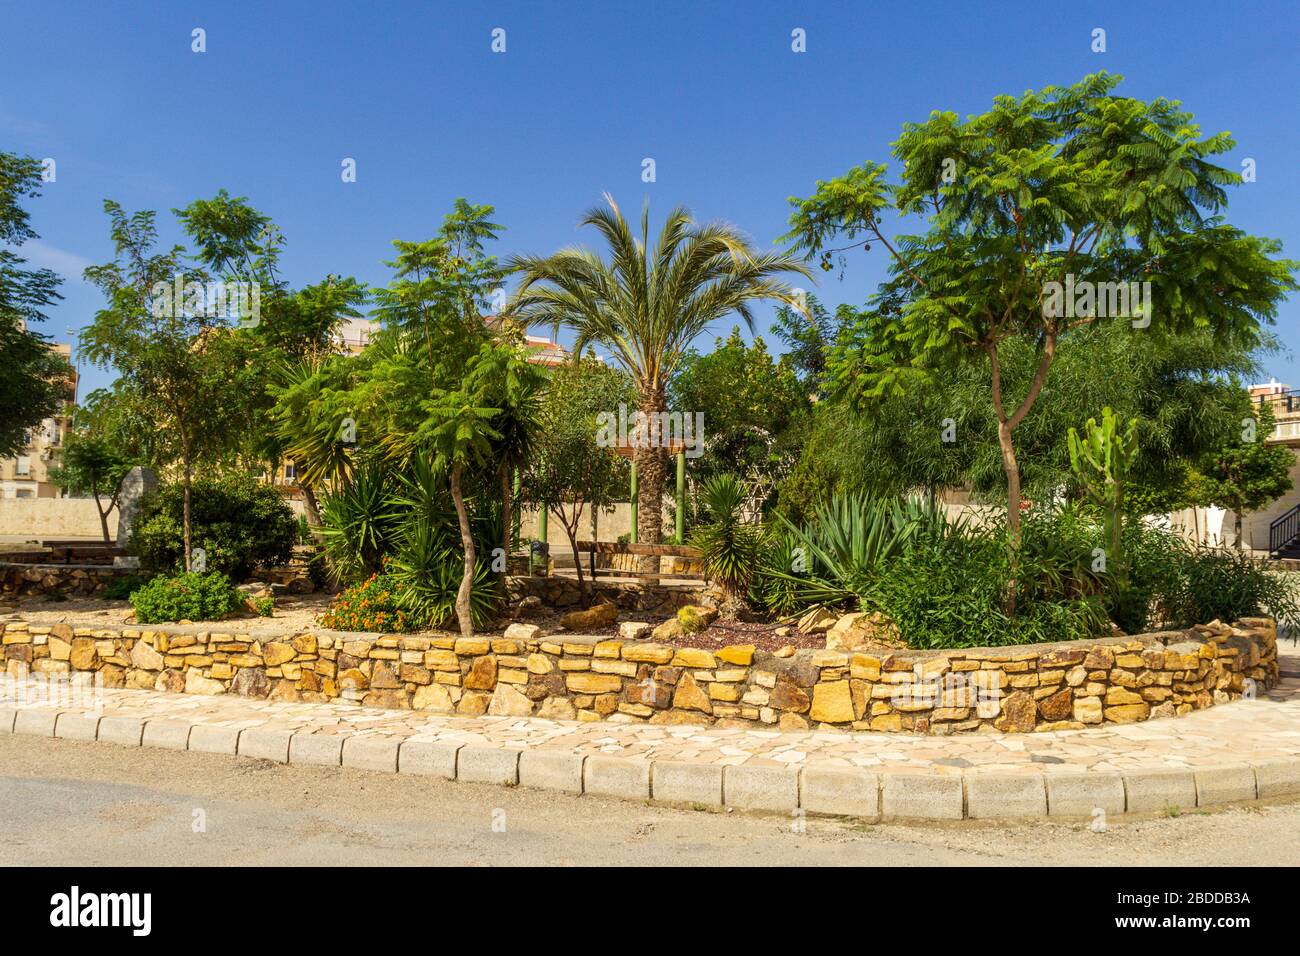 Open Space Rest Area Planted With Trees and Plants, Albox Almeria Province Andalucia Spain Stock Photo